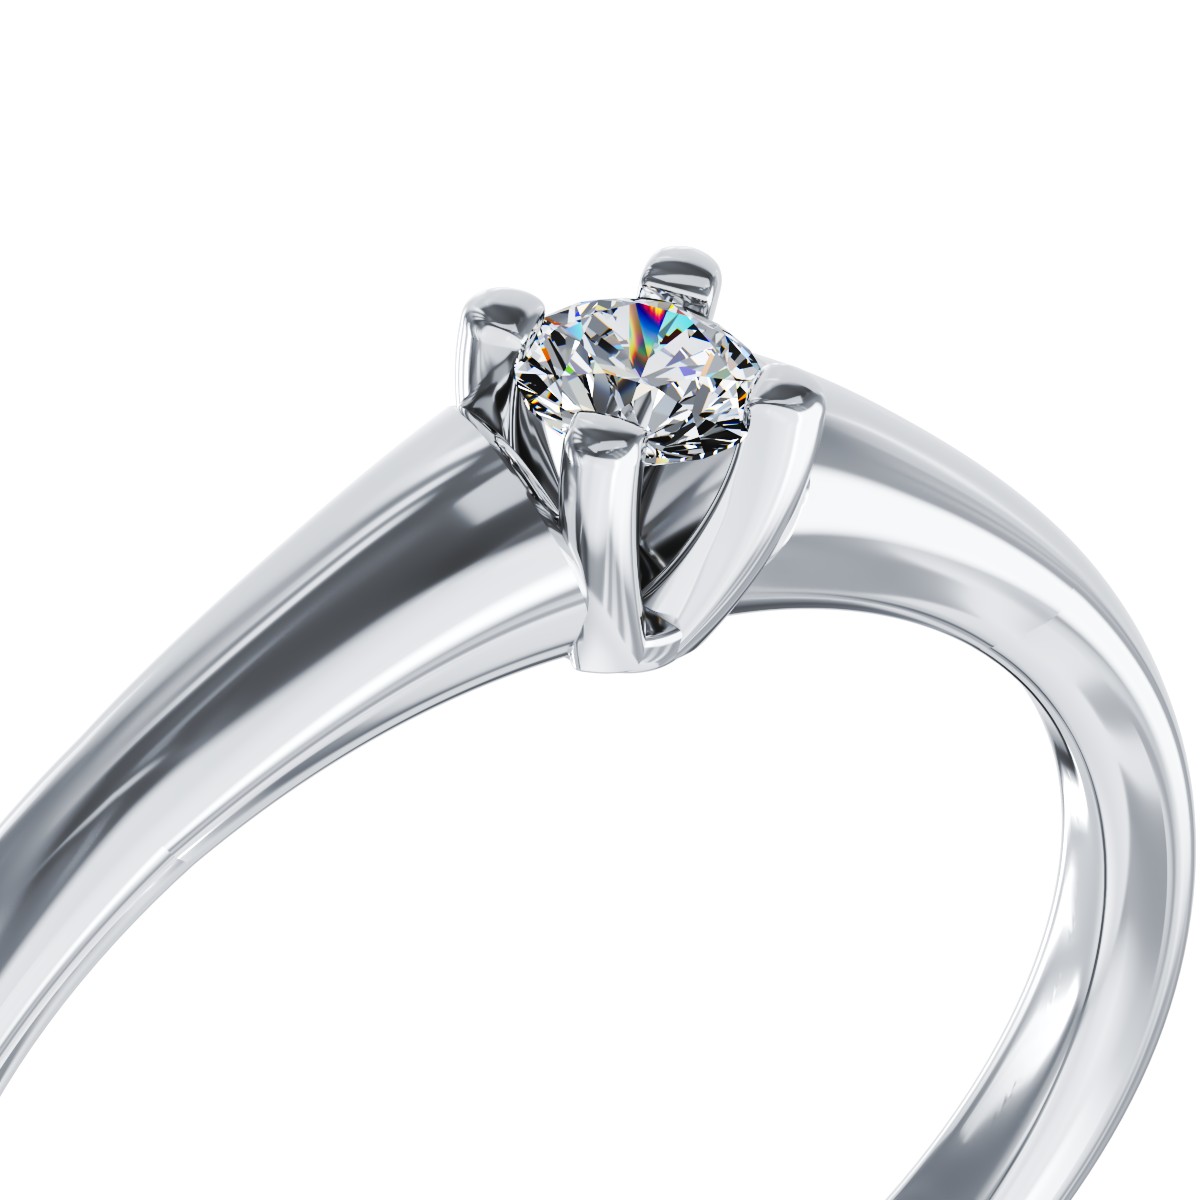 White gold engagement ring with 0.1ct solitaire diamond